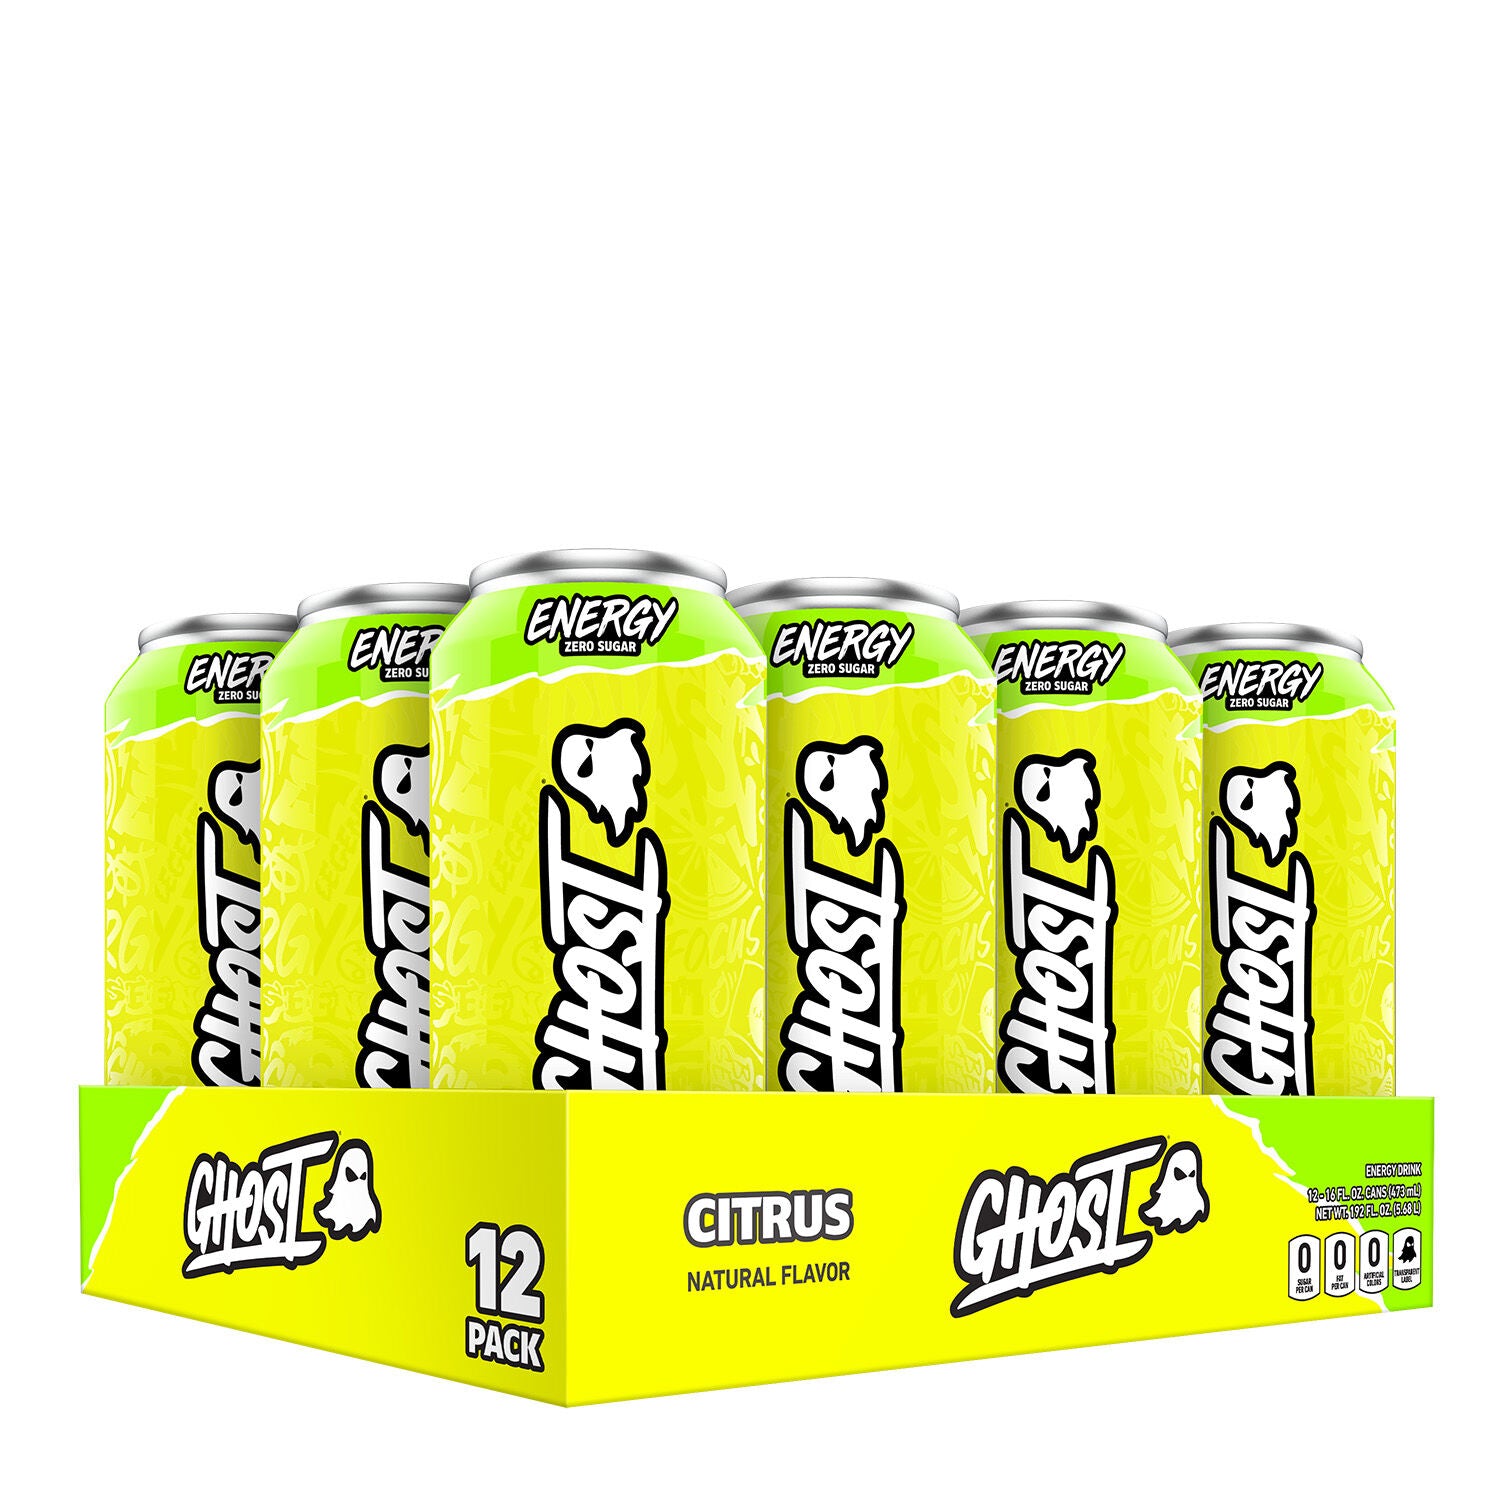 GHOST Energy Drink (1 case of 12 cans) Protein Snacks Citrus GHOST